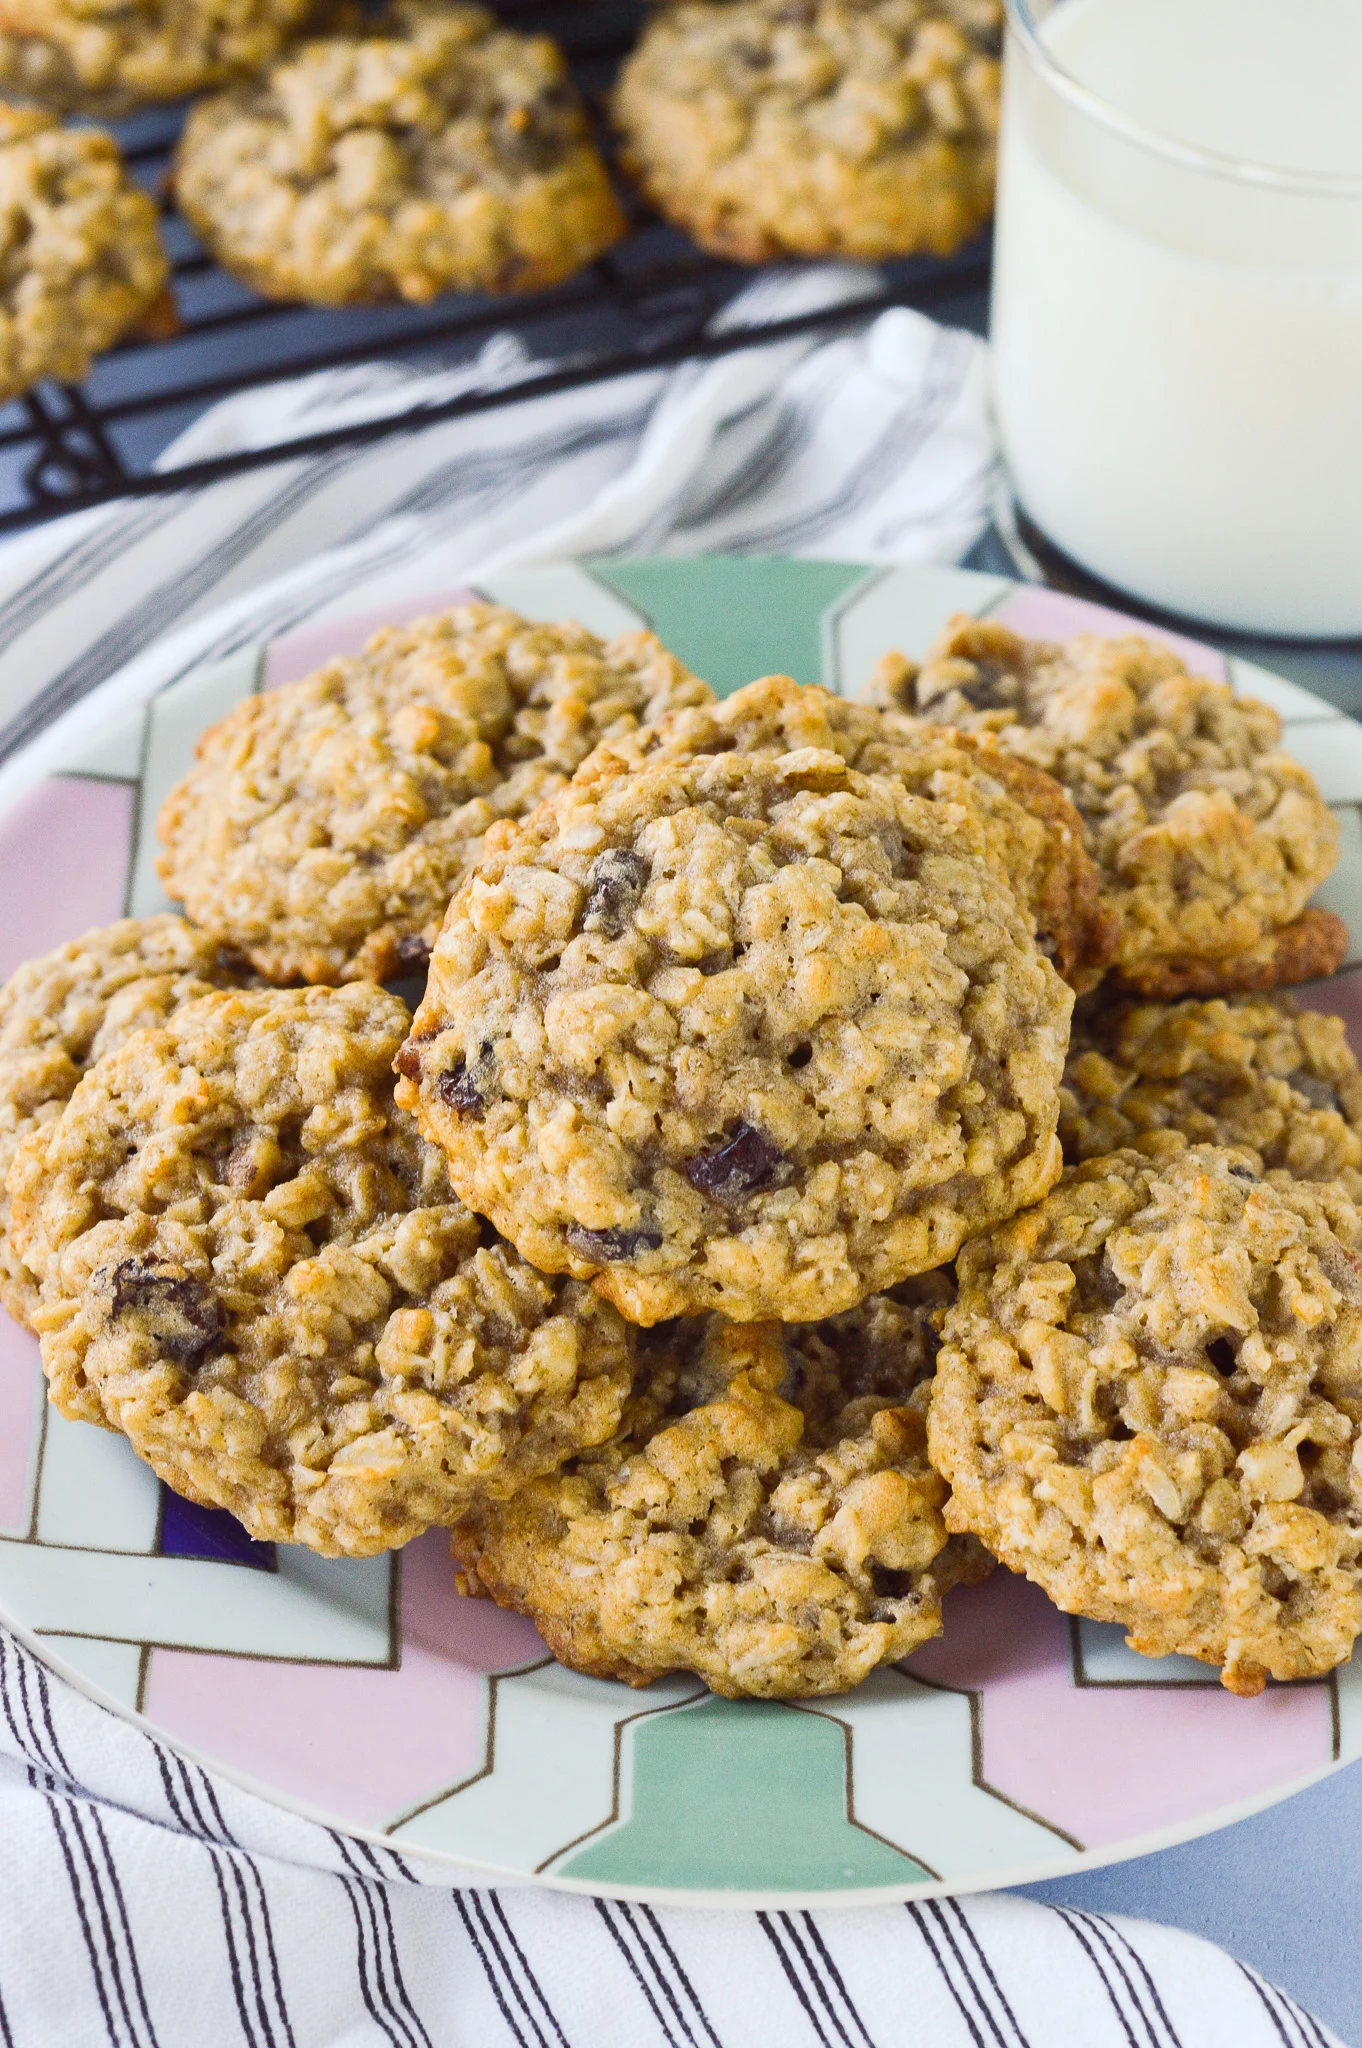 https://www.sugardishme.com/wp-content/uploads/2021/03/Chewy-Oatmeal-Cookies-on-a-Plate.jpg.webp